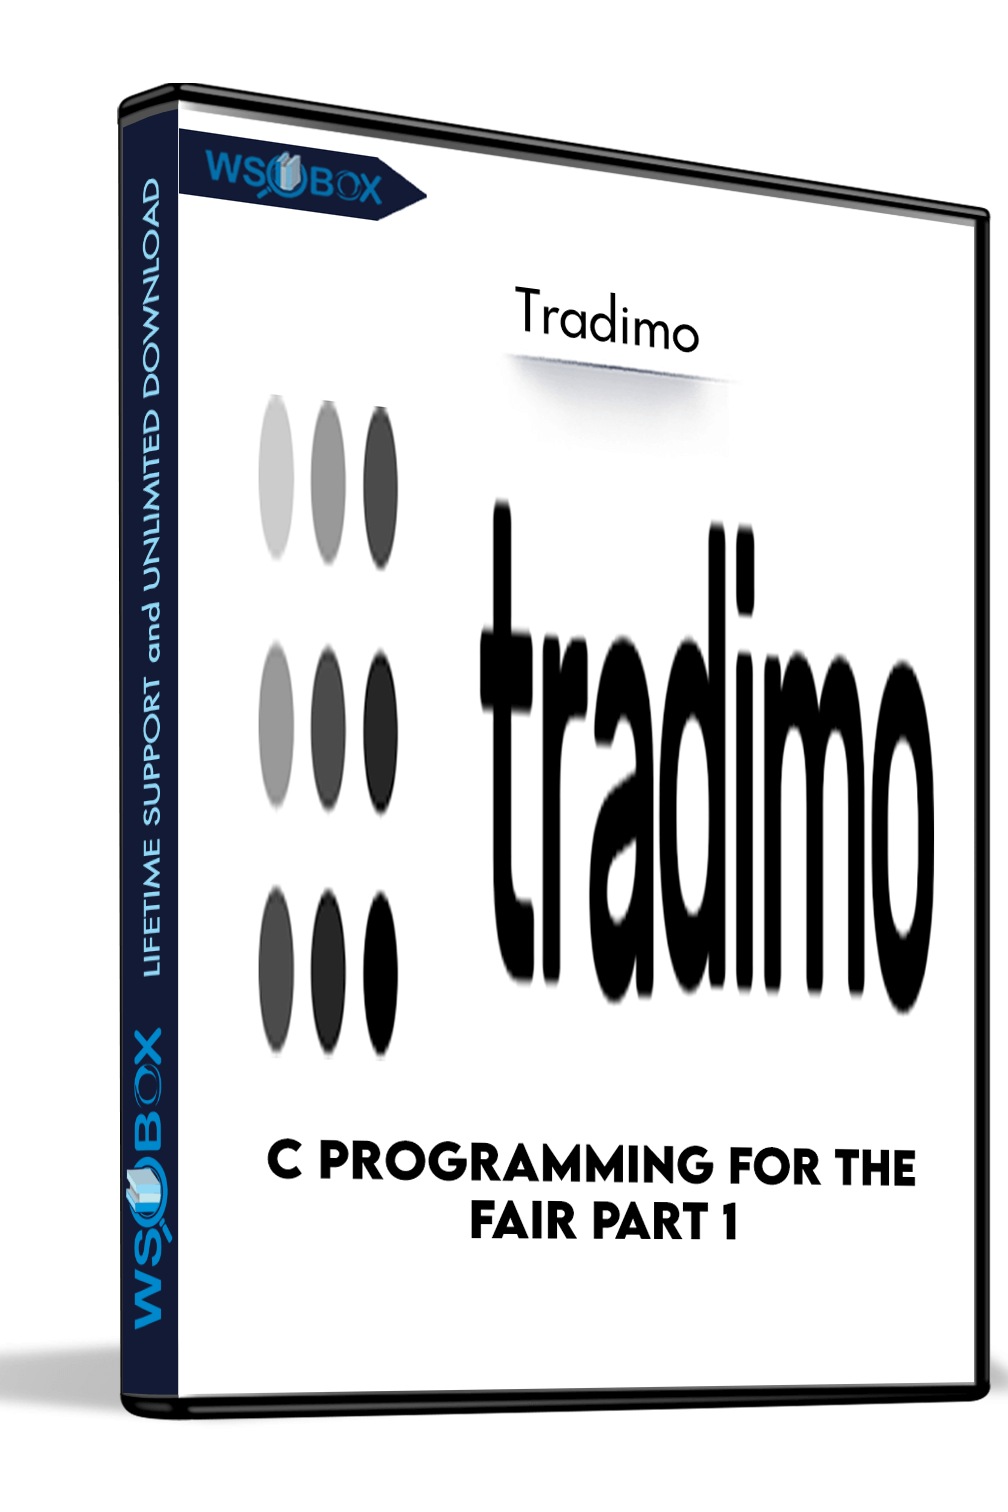 C Programming for the fair part 1 – Tradimo